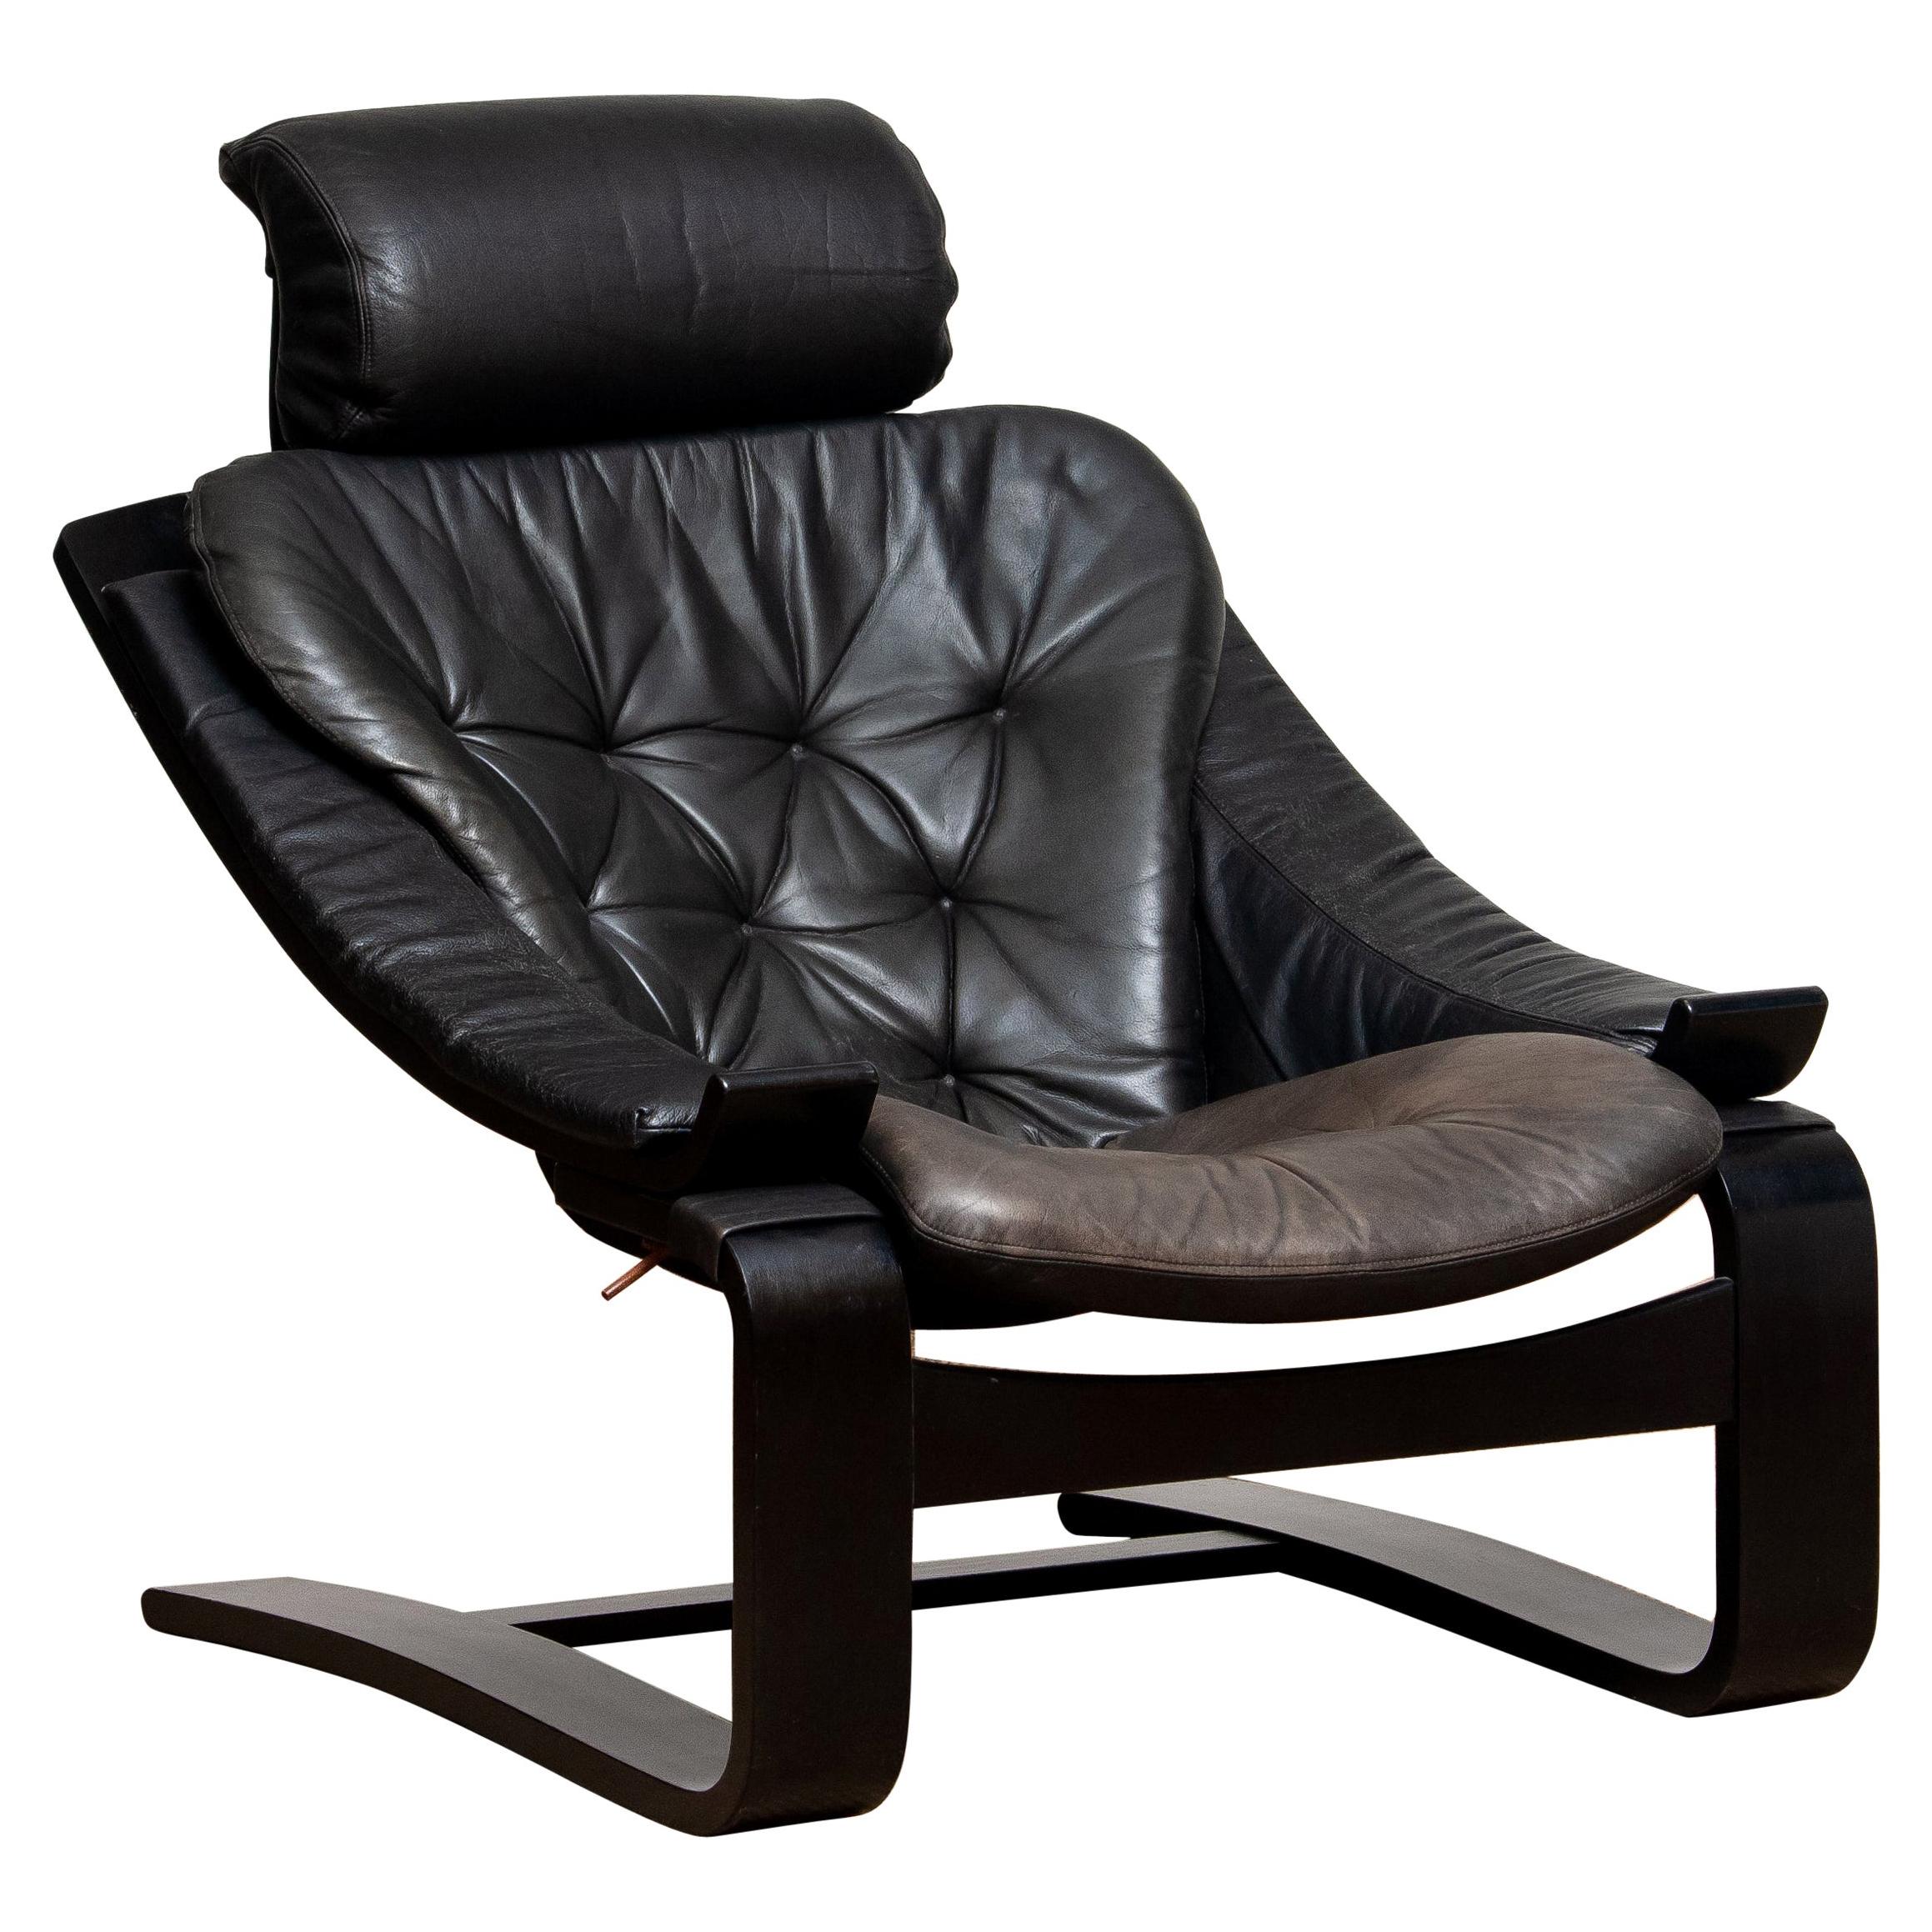 1970s, Black Leather Club Lounge Chair by Ake Fribytter for Nelo, Sweden